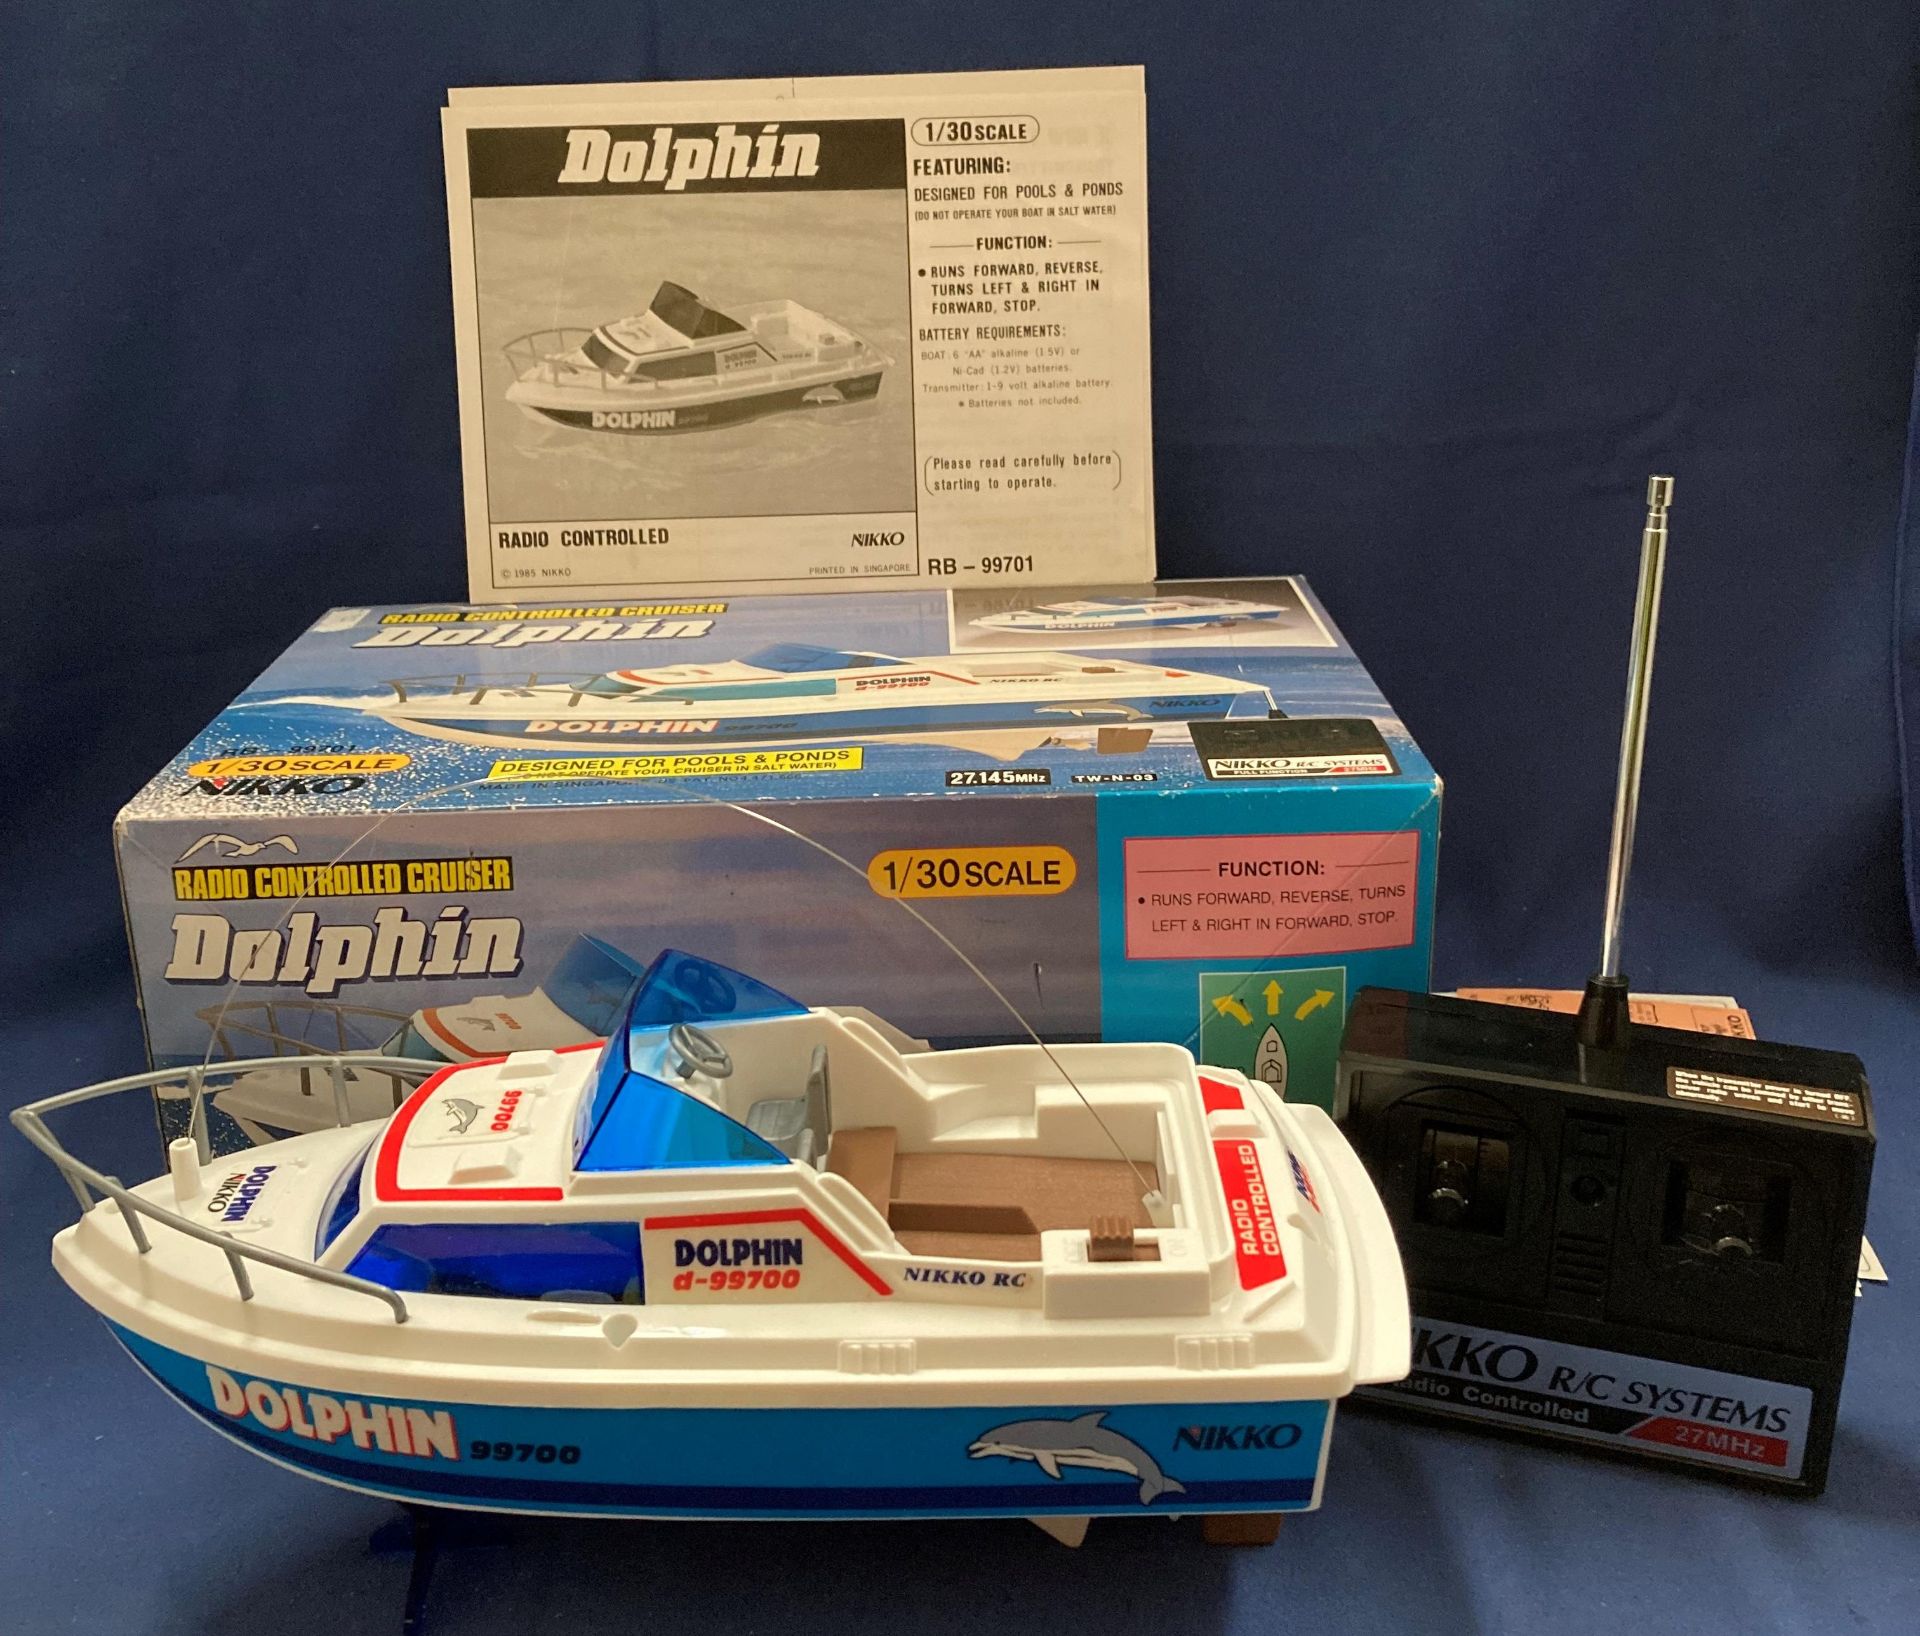 Dolphin RB-99701 1/30 scale radio controlled cruiser by Nikko - boxed (S1 glass cab rost)